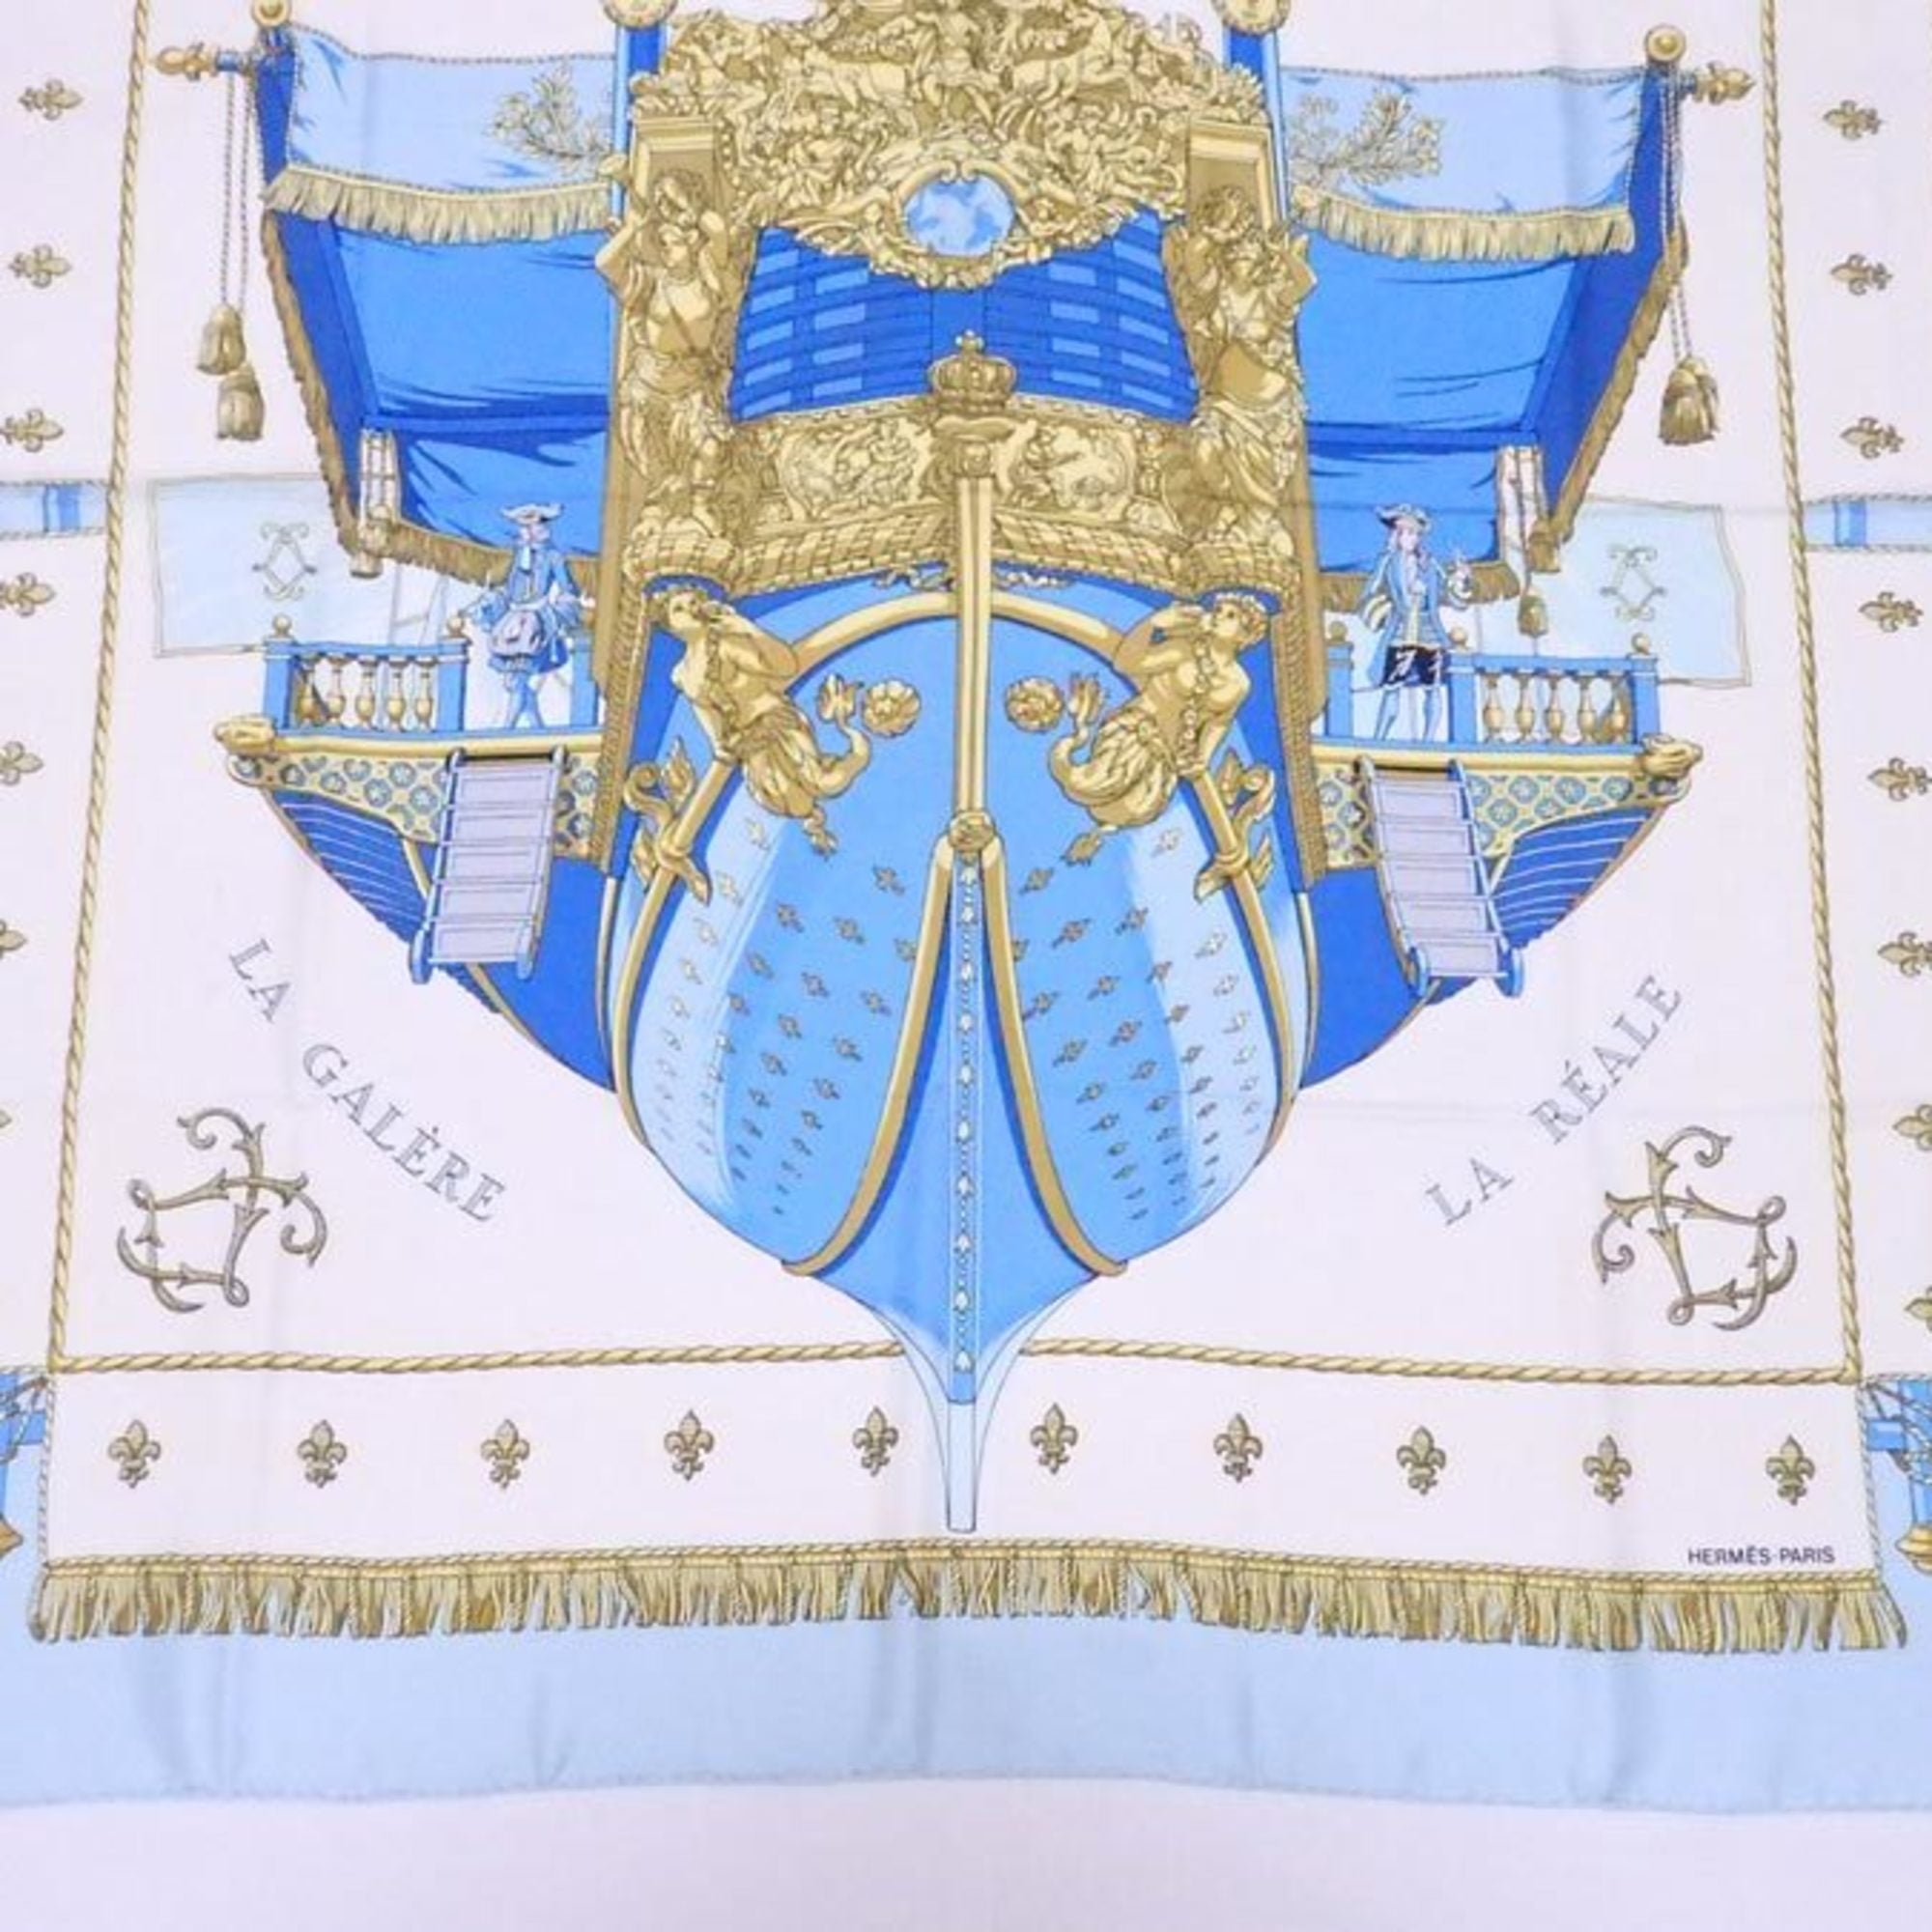 Authenticated used Hermes Hermes Scarf Karenano 20 Brides de Gala Blue x White 100% Silk, Adult Unisex, Size: One Size